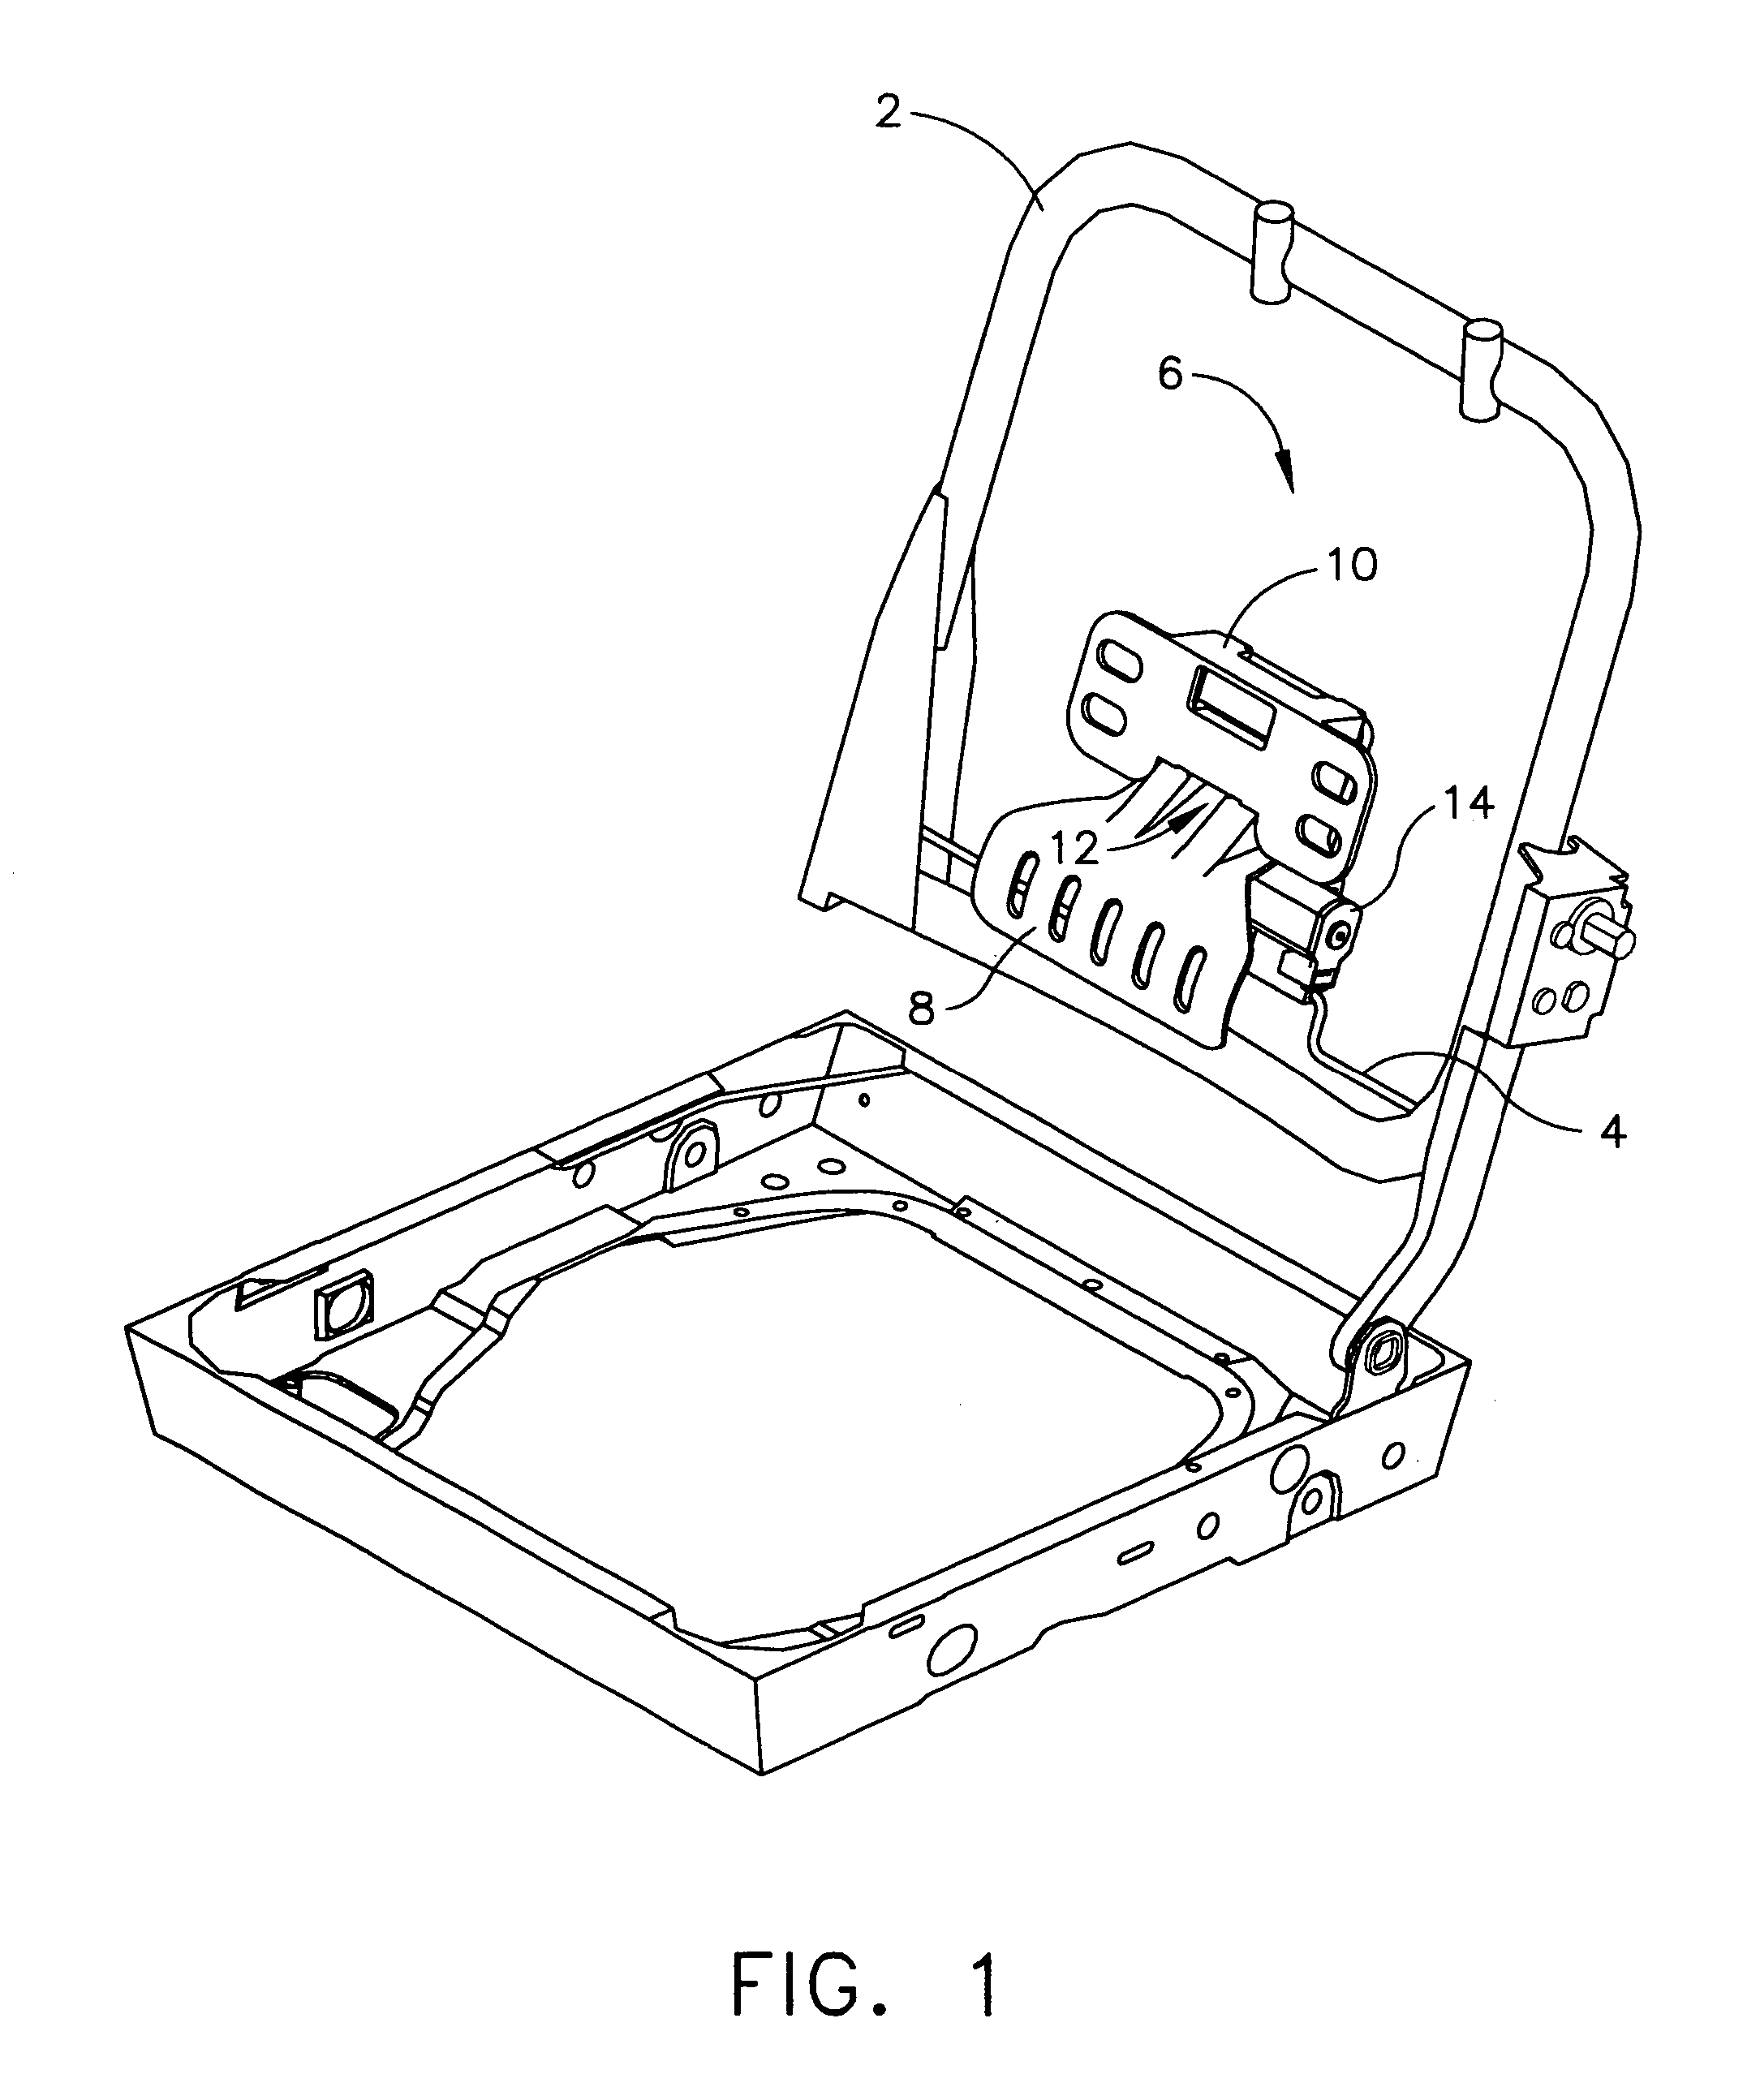 Universal ergonomic support with self-contained actuator